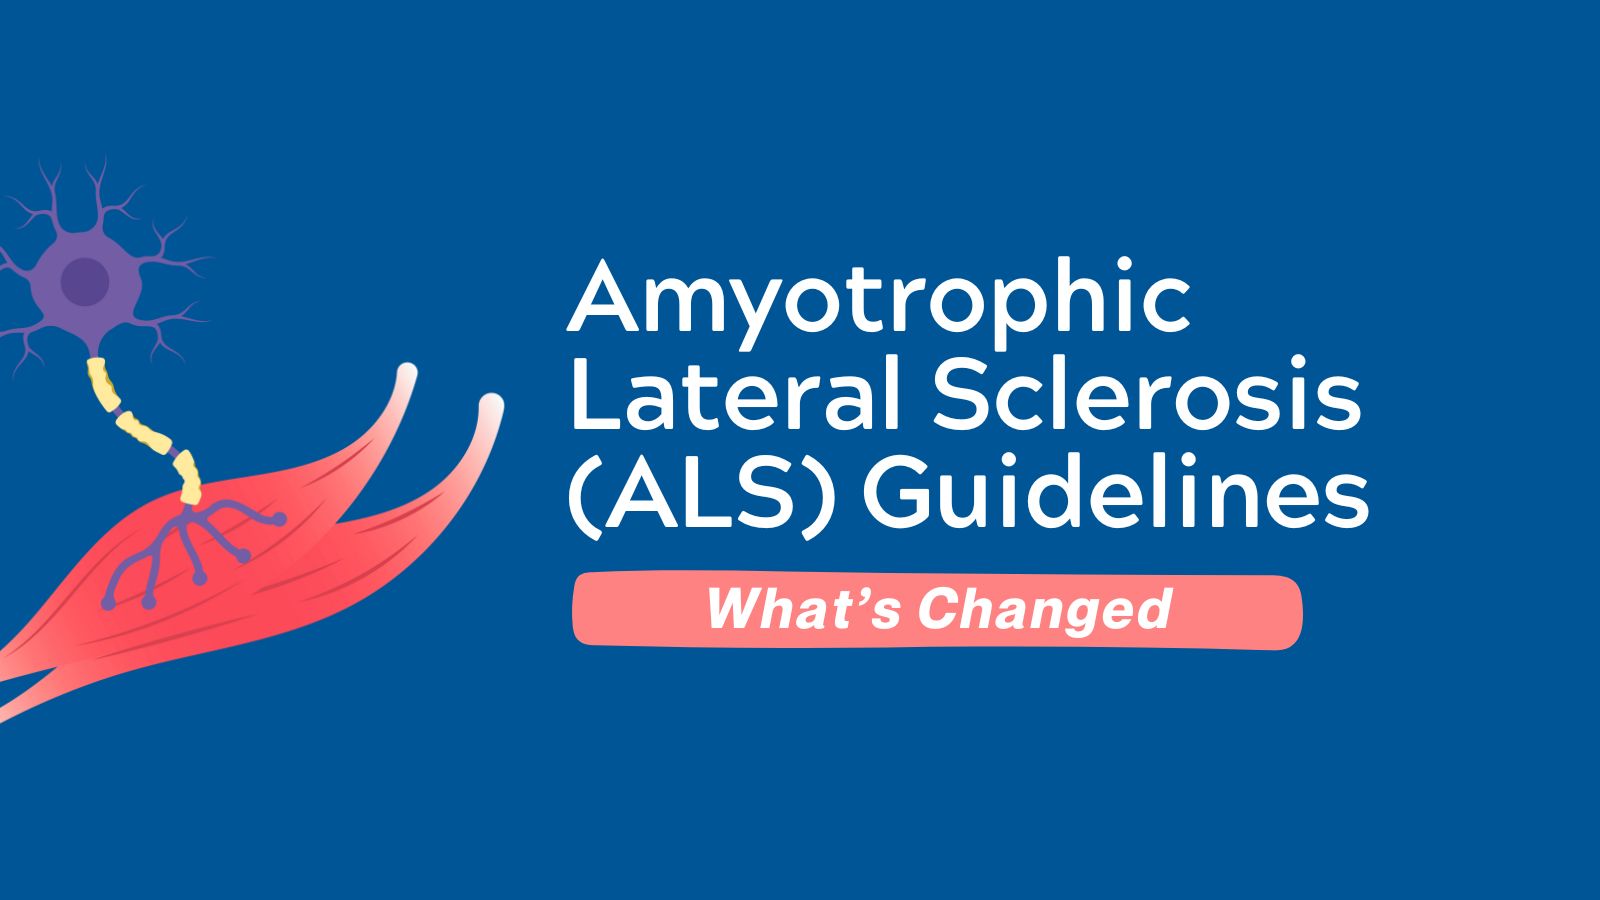 What's Changed - Amyotrophic Lateral Sclerosis (ALS)